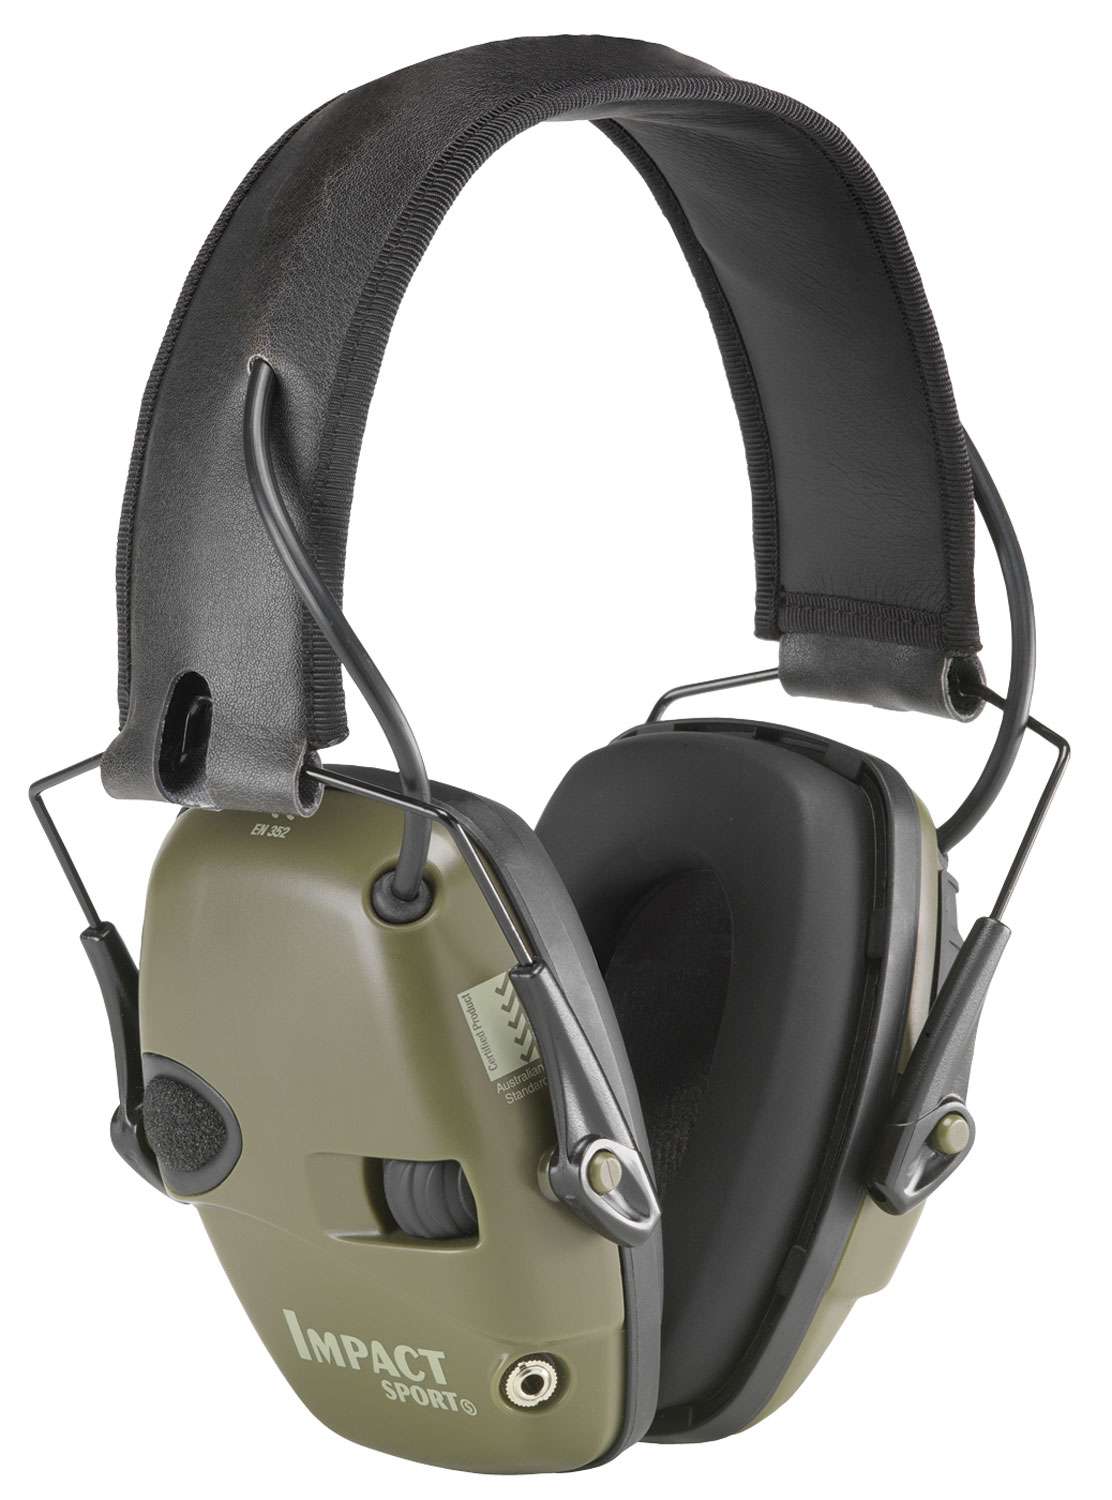 Howard Leight R01526 Impact Sport Electronic Muffs 22 dB Over the Head Green Ear Cups w/Black Band